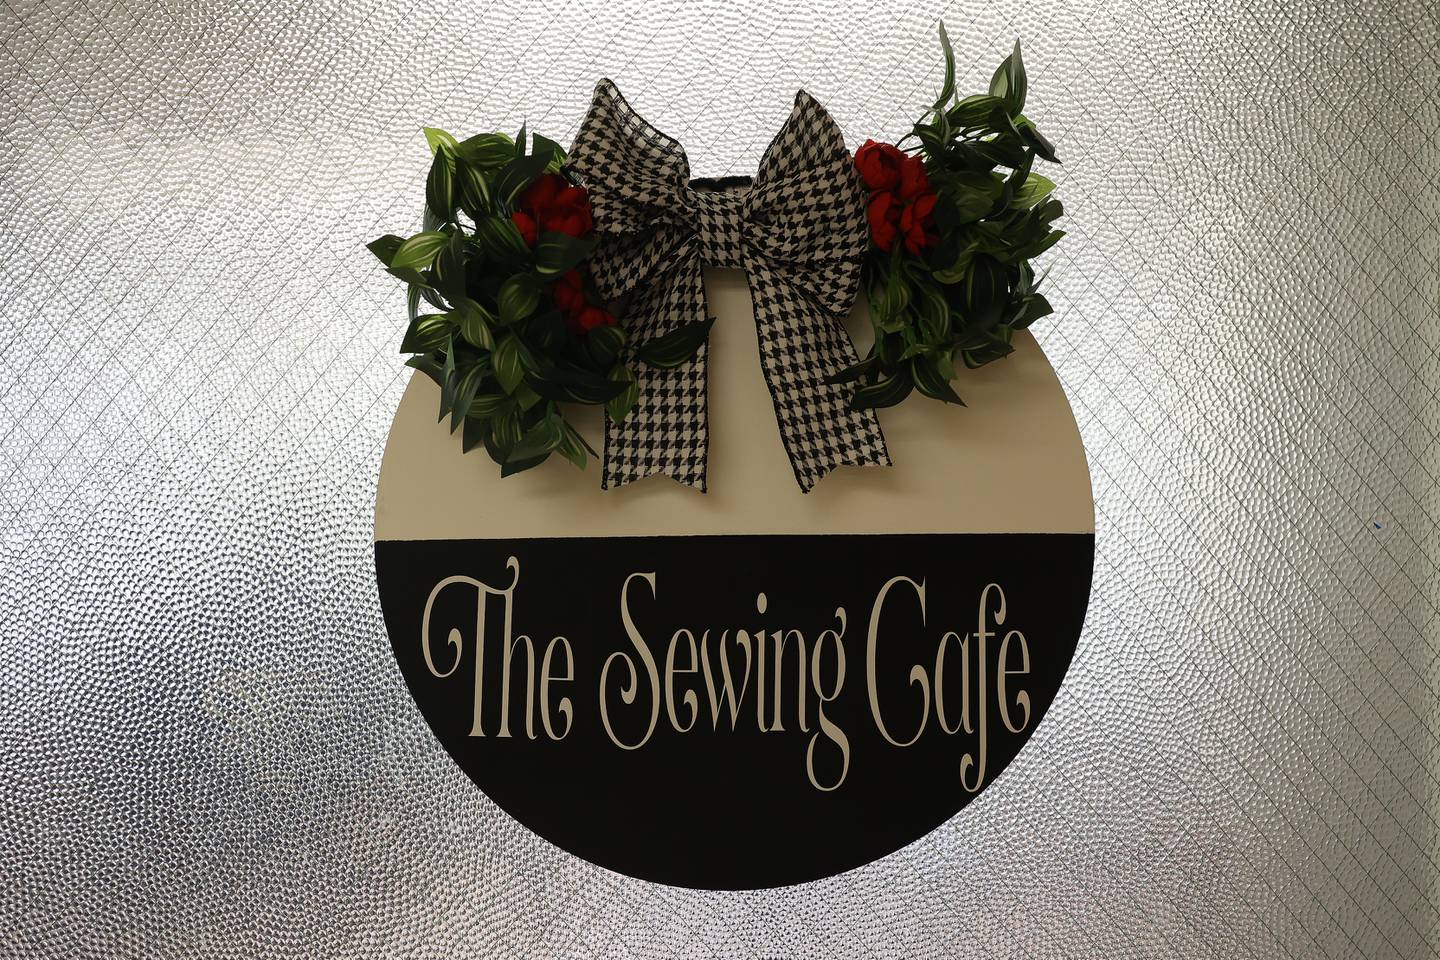 The Sewing Cafe specializes a variety of sewing products, from personalized bags and appearal to quilts.